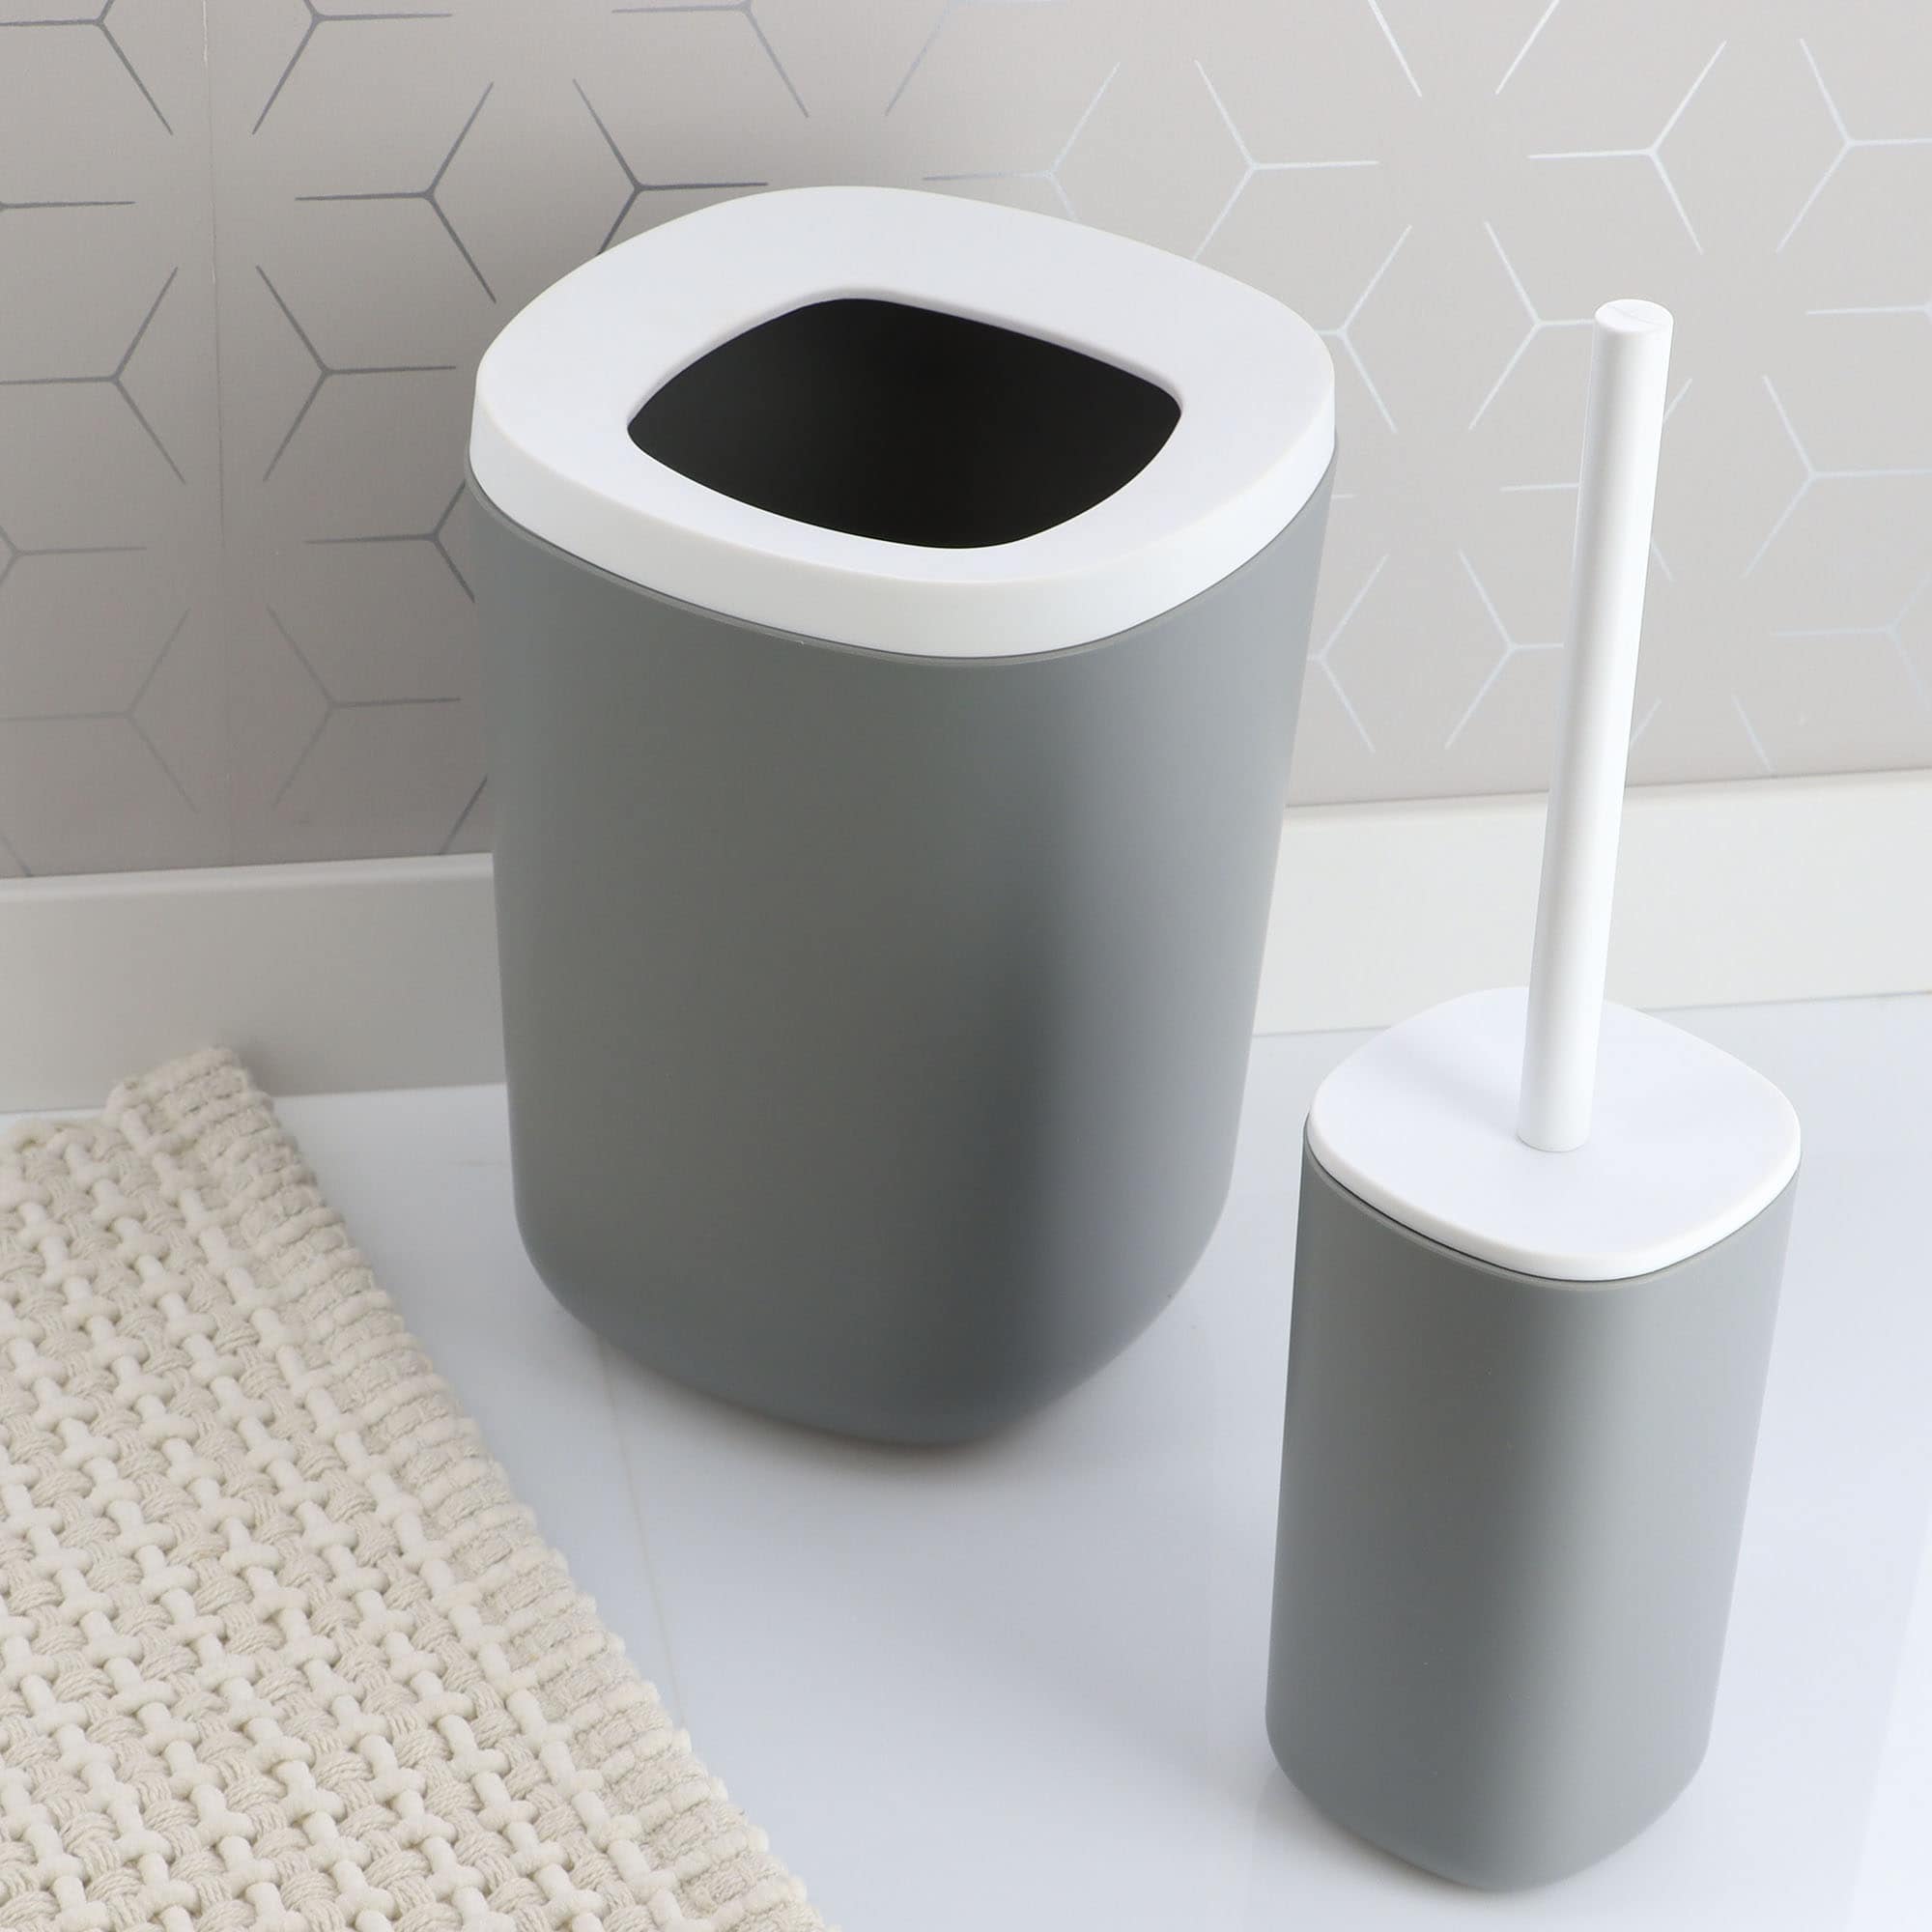 compact and practical bathroom collection for new homeowners, hotel, students, B&B owners, apartment renters